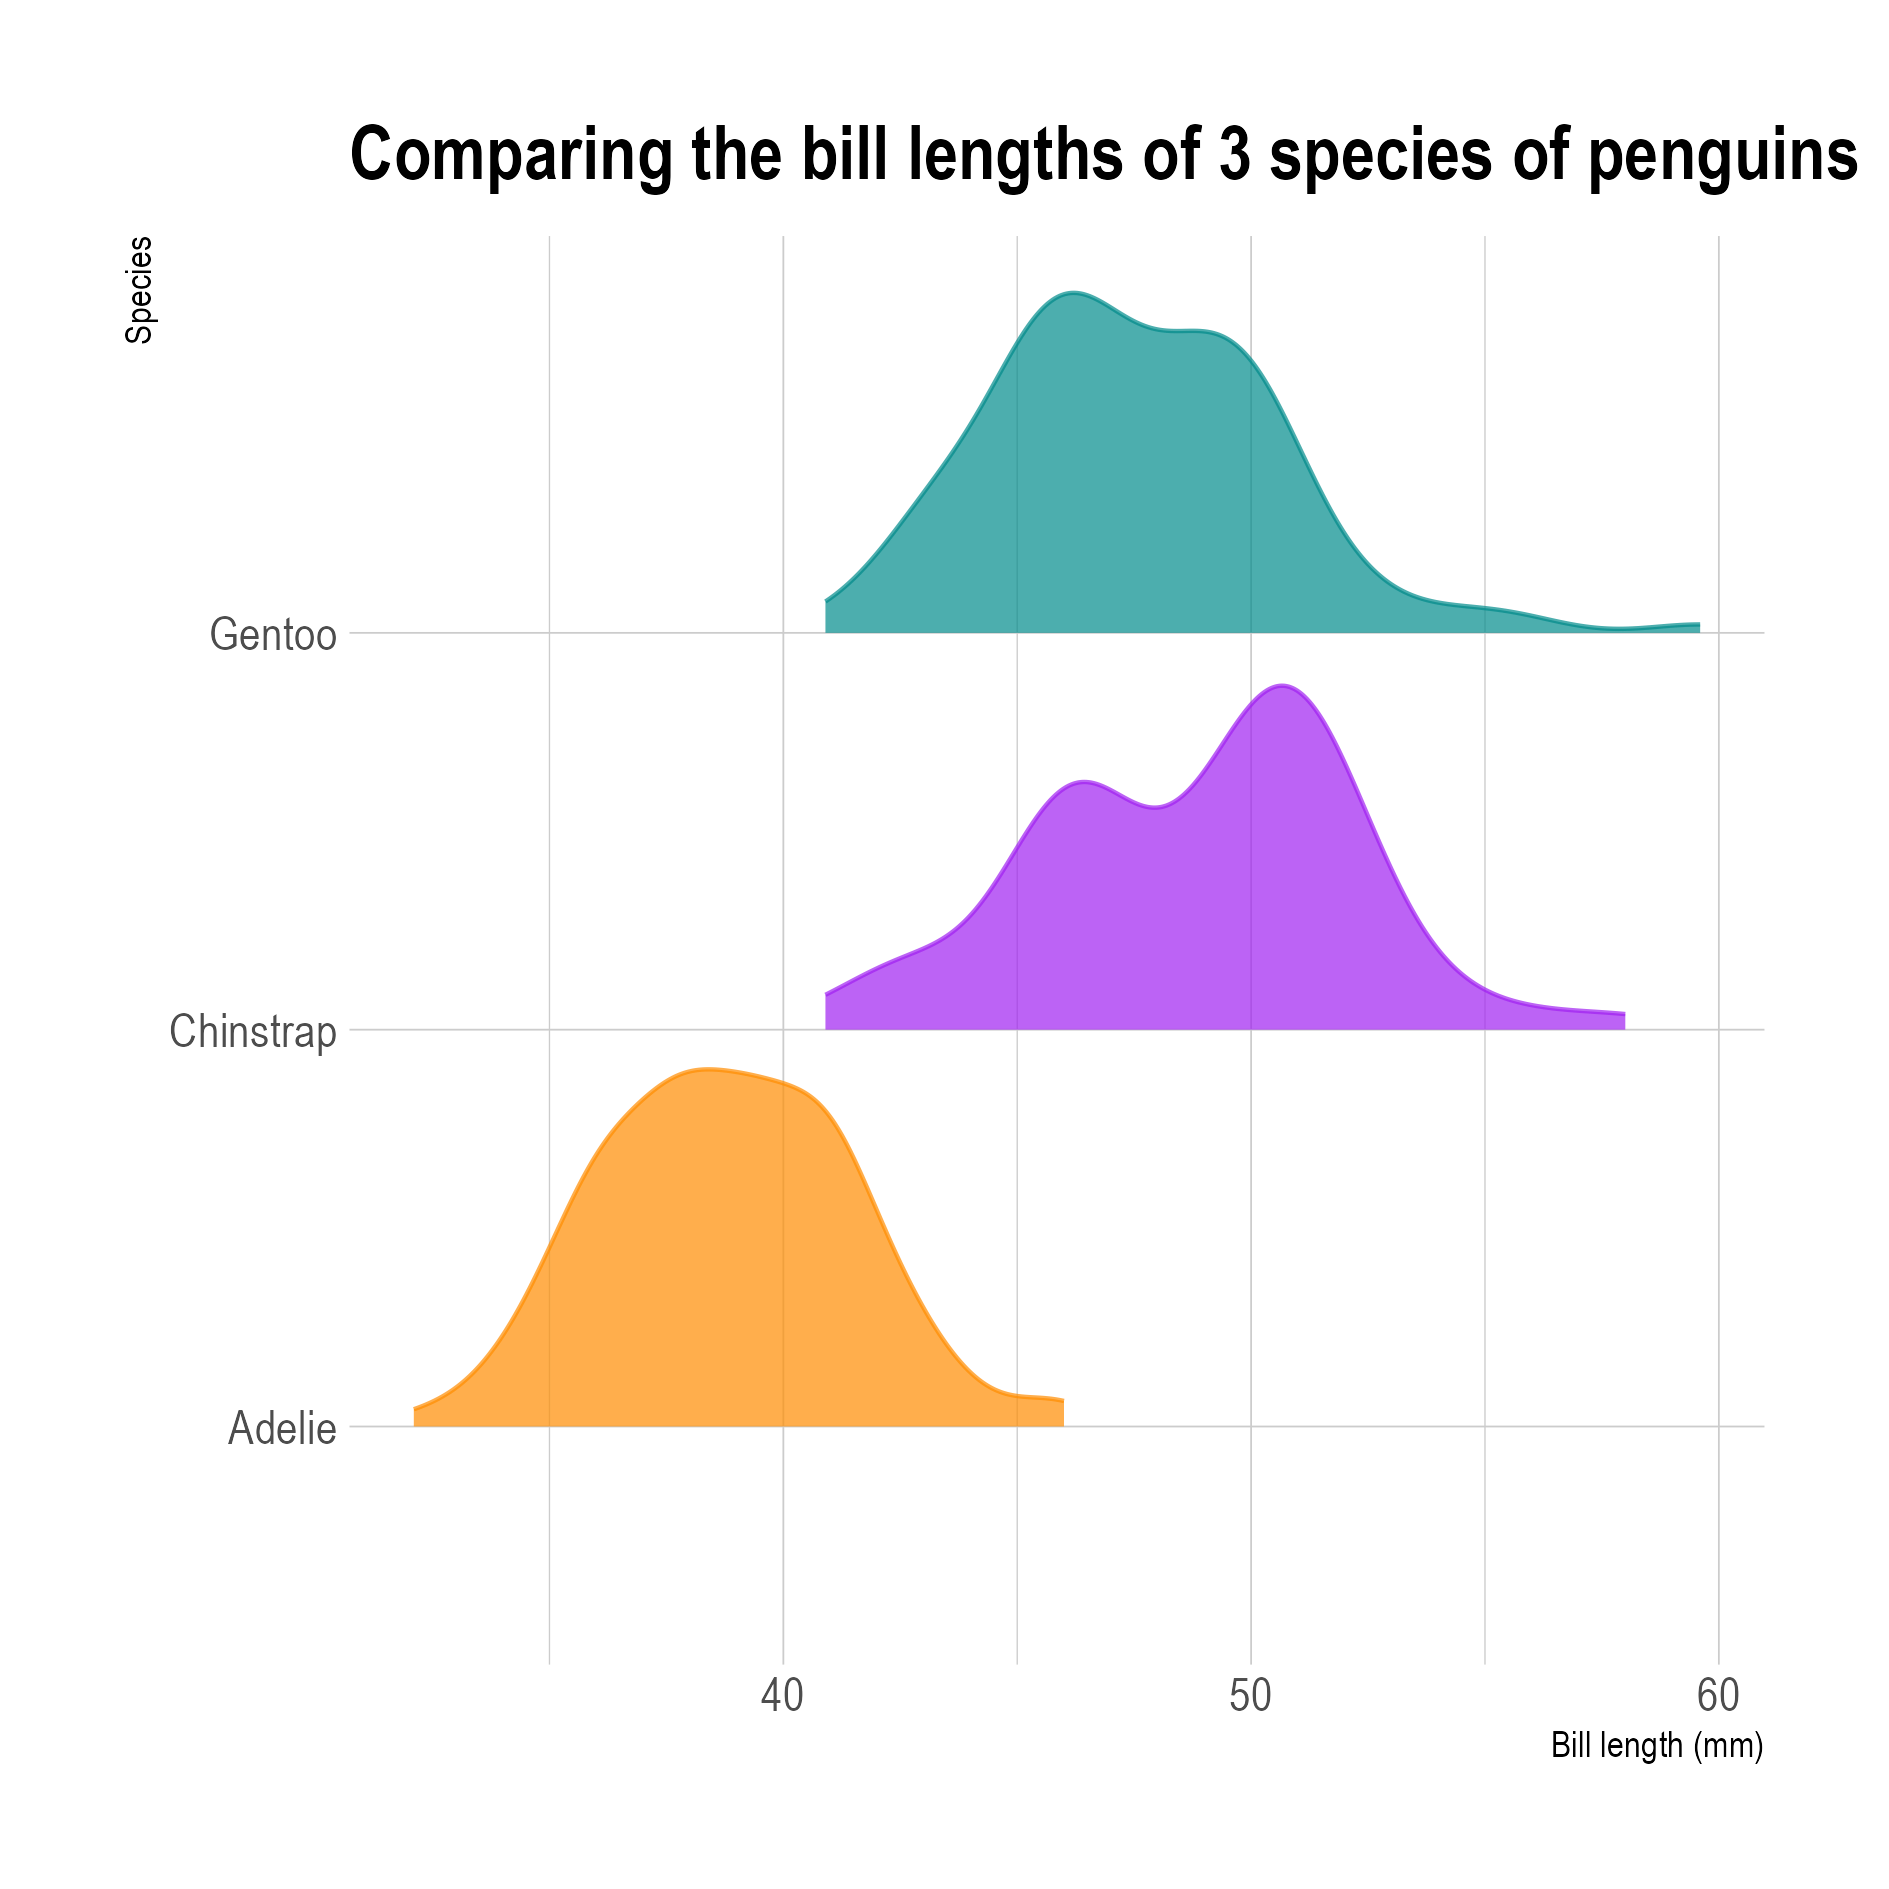 3 density plots showing the bill length distribution of 3 species of penguin, plotted on 3 different base lines